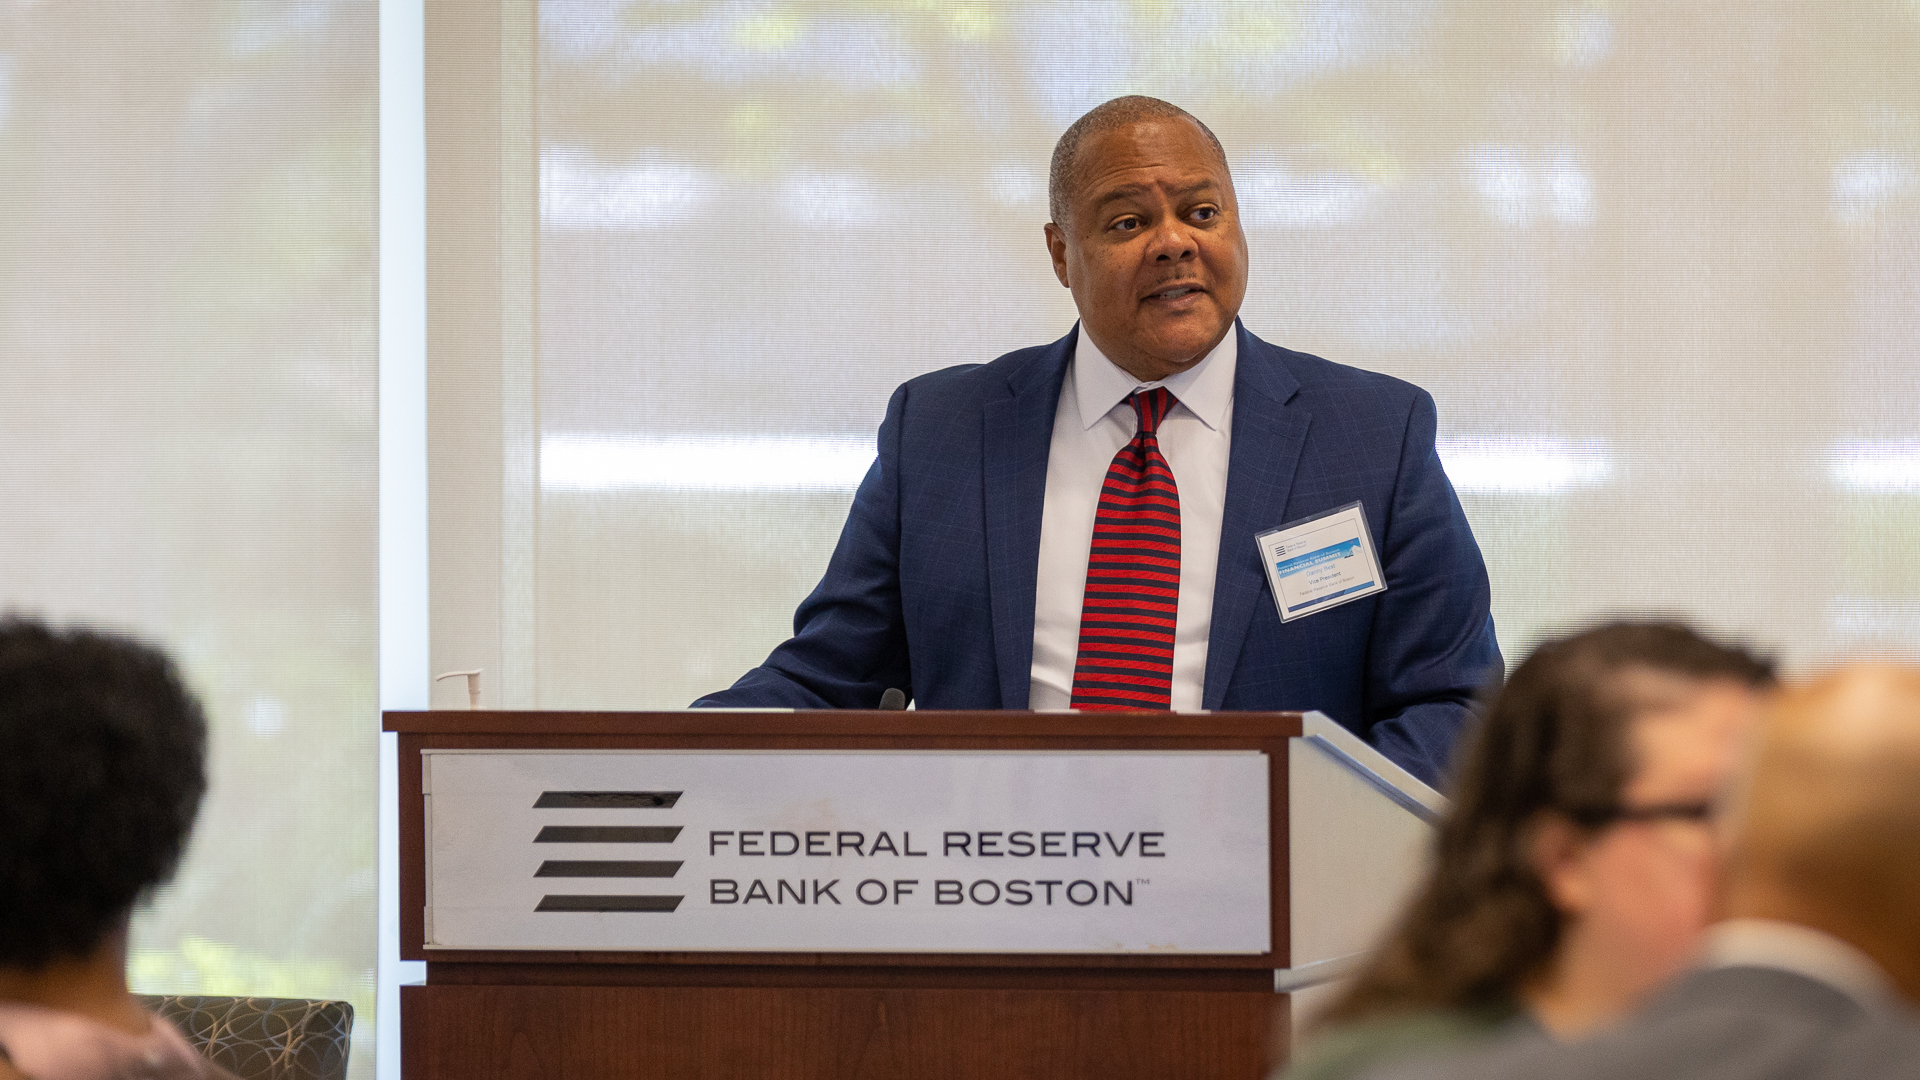 The Boston Fed's Danny Best welcomes participants to the Bank's first annual Financial Summit. May 18, 2023.